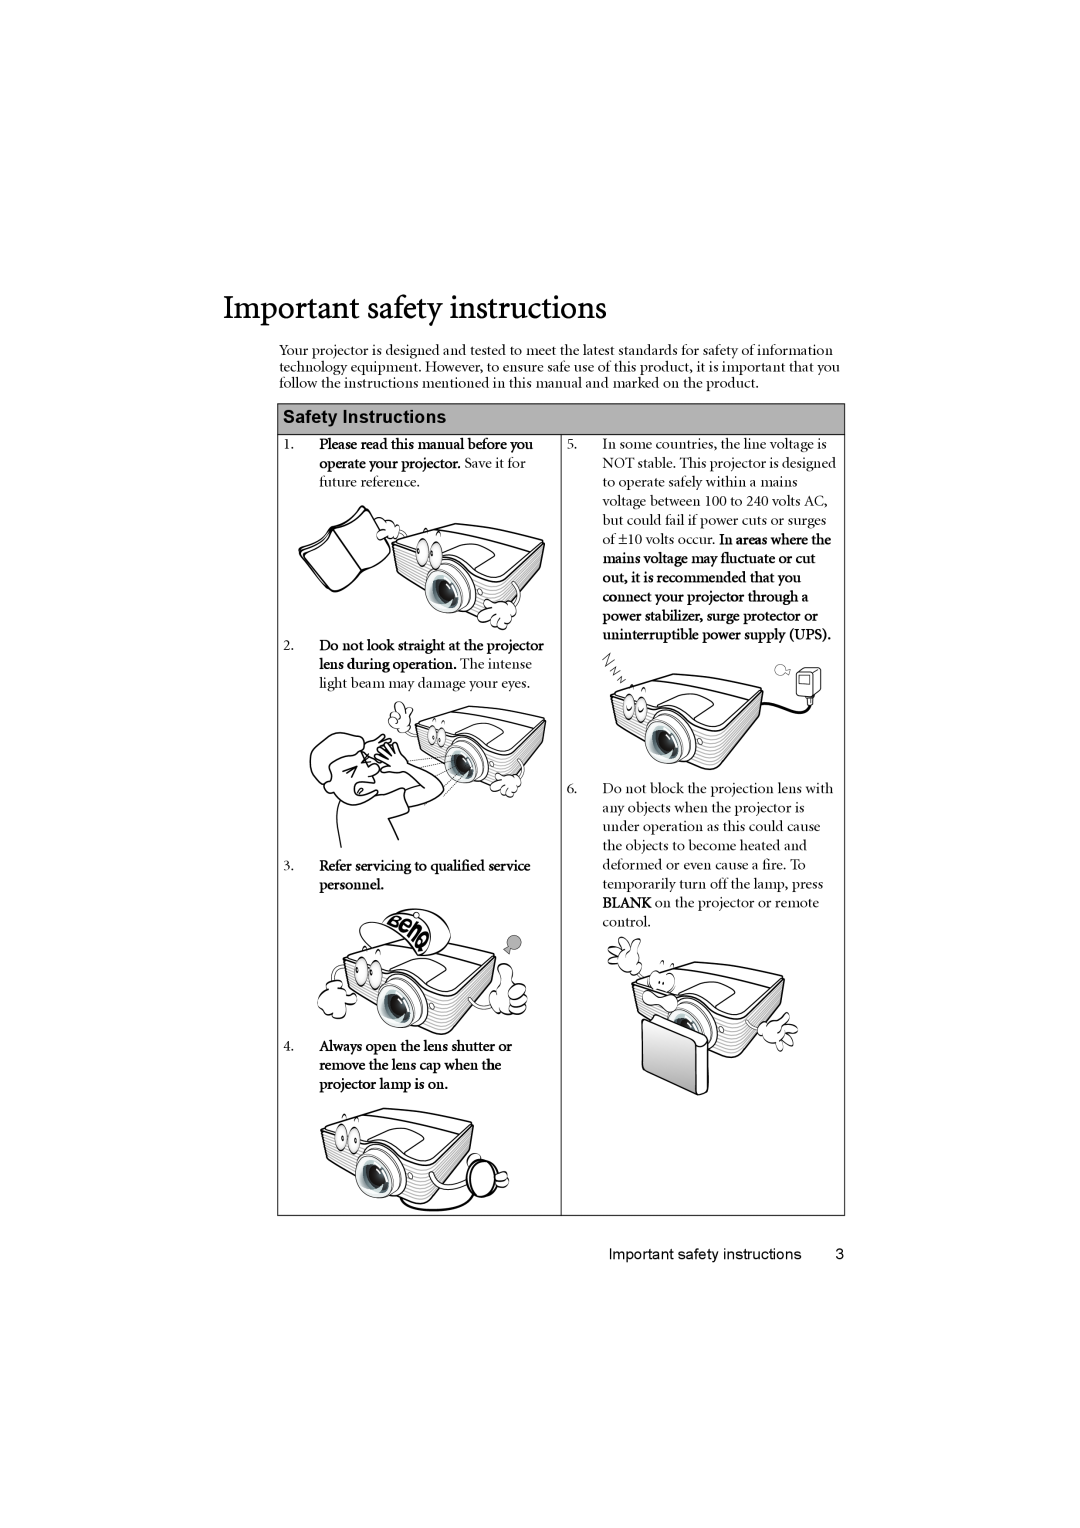 BenQ MP776 ST Important safety instructions, Safety Instructions, Refer servicing to qualified service personnel 